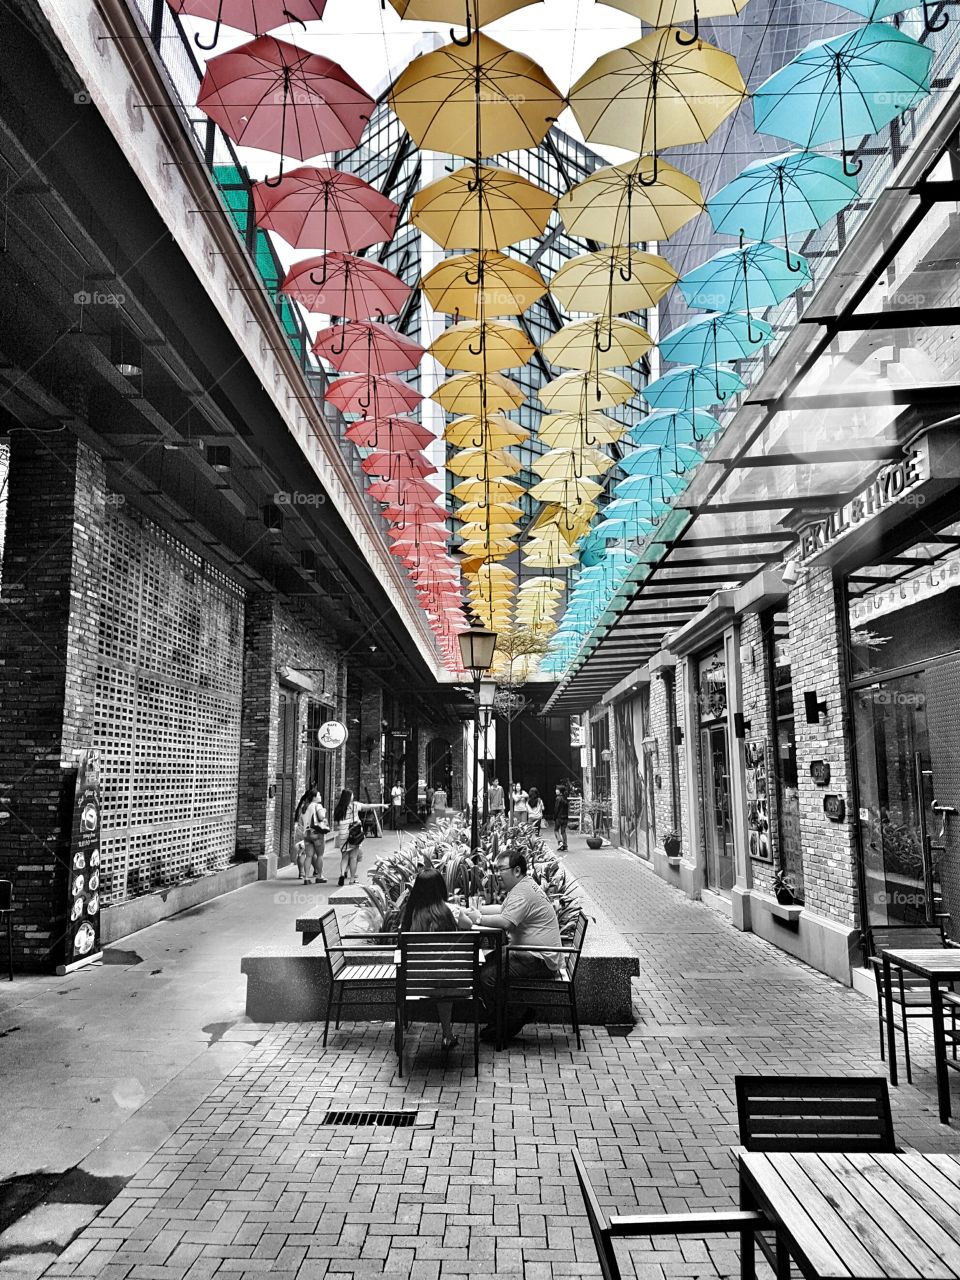 Street decorated with colorful umbrella